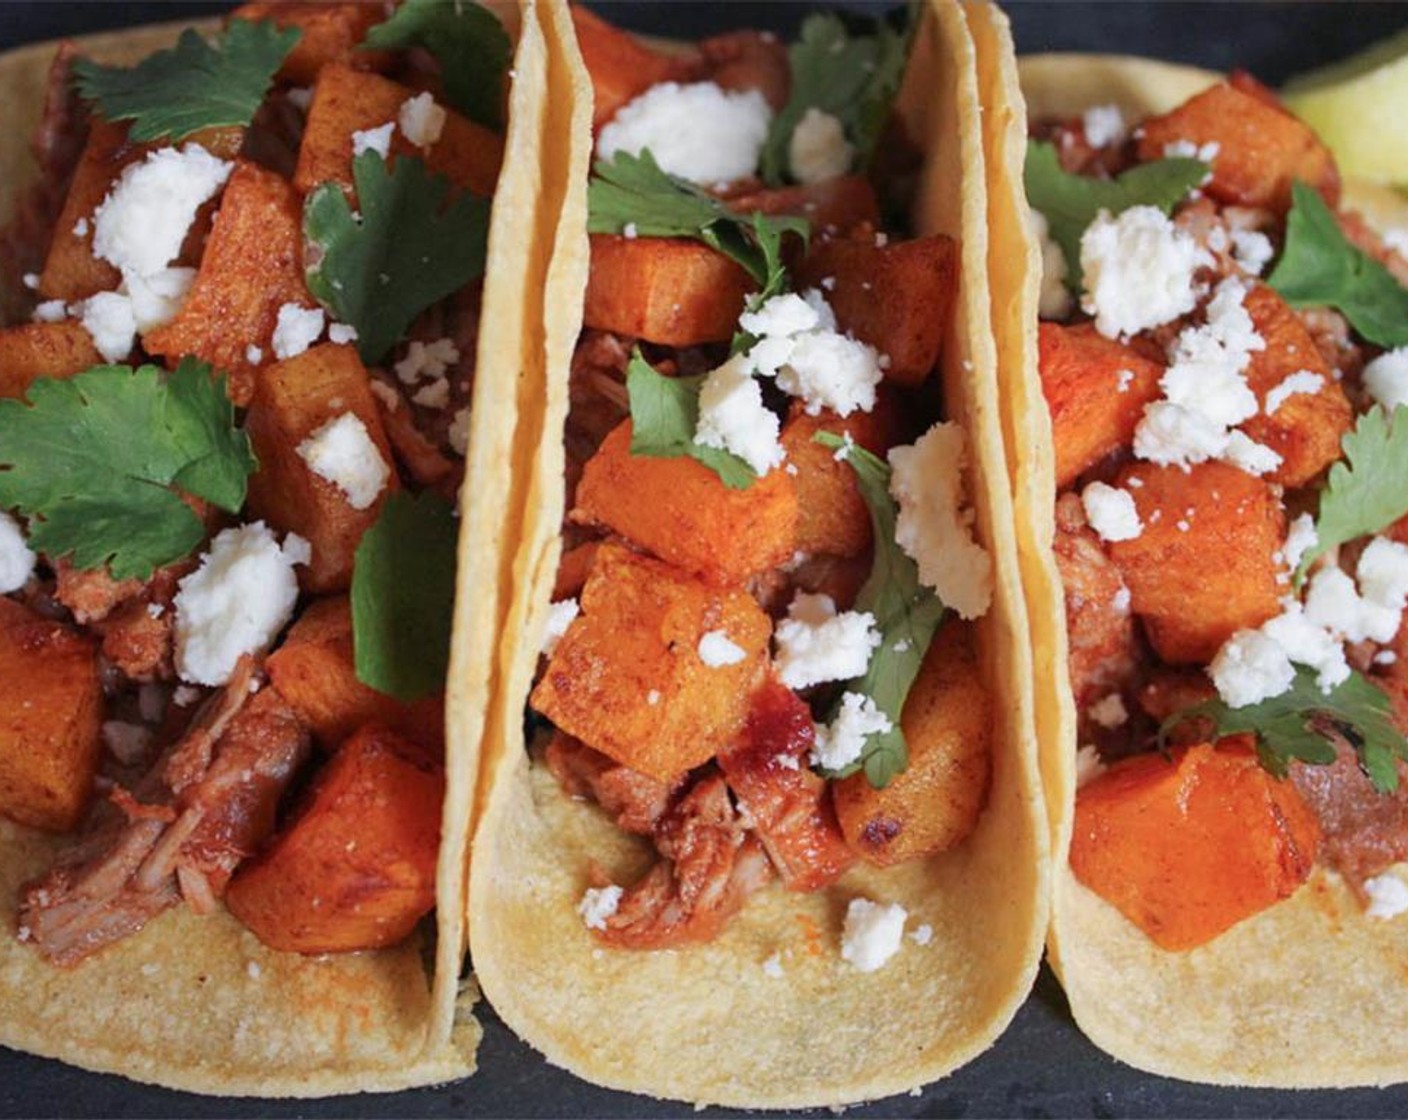 step 13 Top each tortilla with your chipotle pork and butternut squash. Garnish with fresh cilantro, a generous sprinkling of queso fresco, and fresh lime wedges. Enjoy!